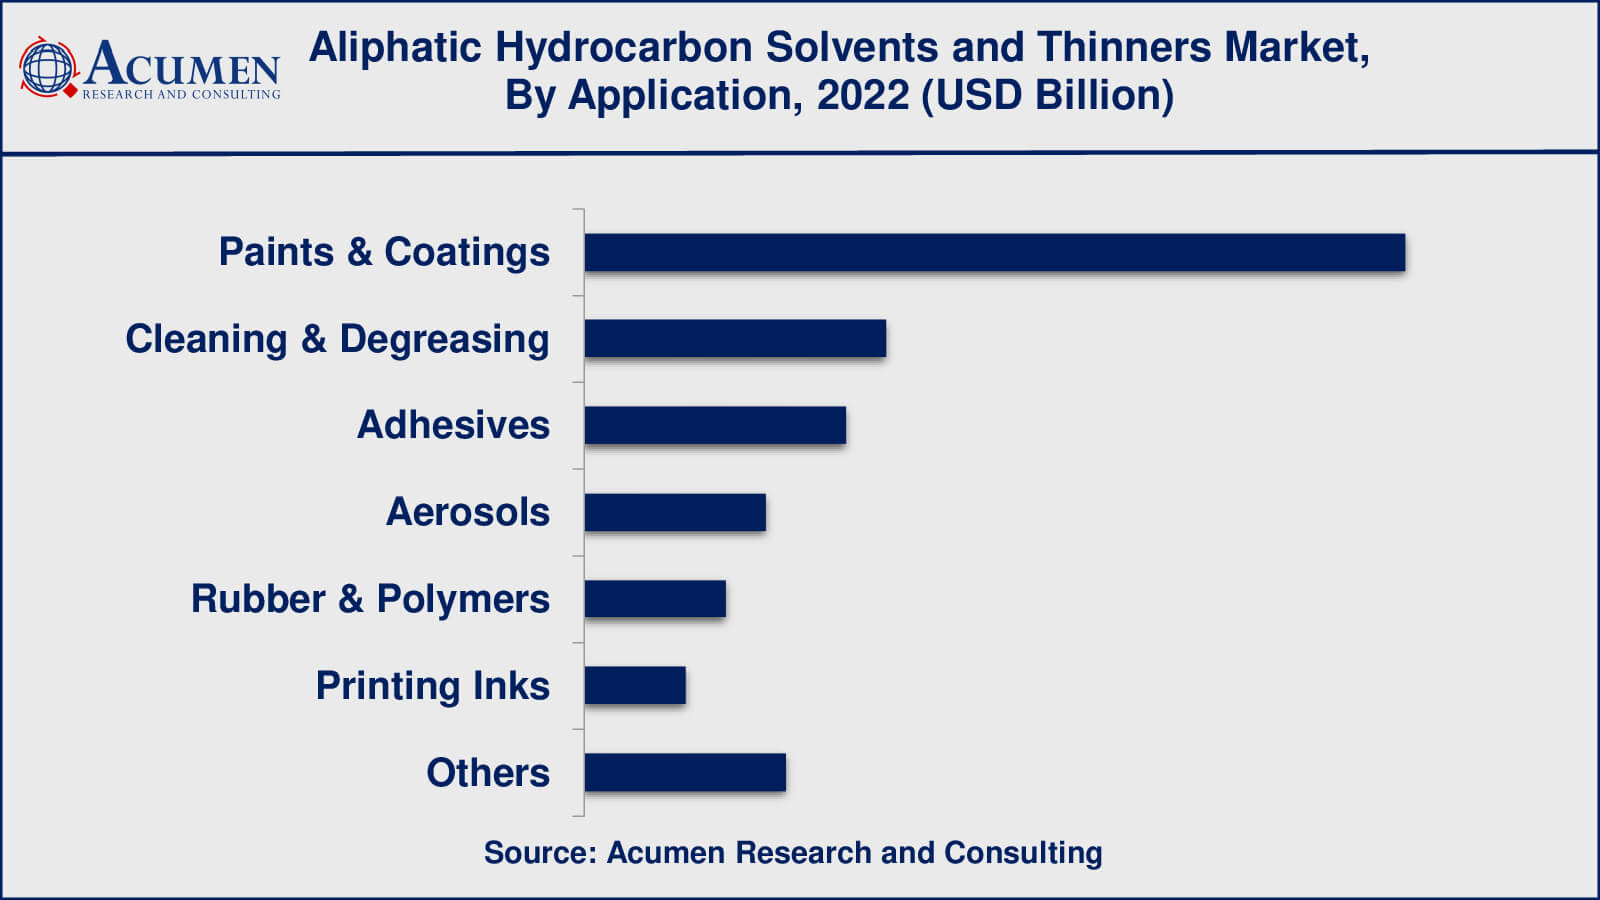 Aliphatic Hydrocarbon Solvents and Thinners Market Drivers